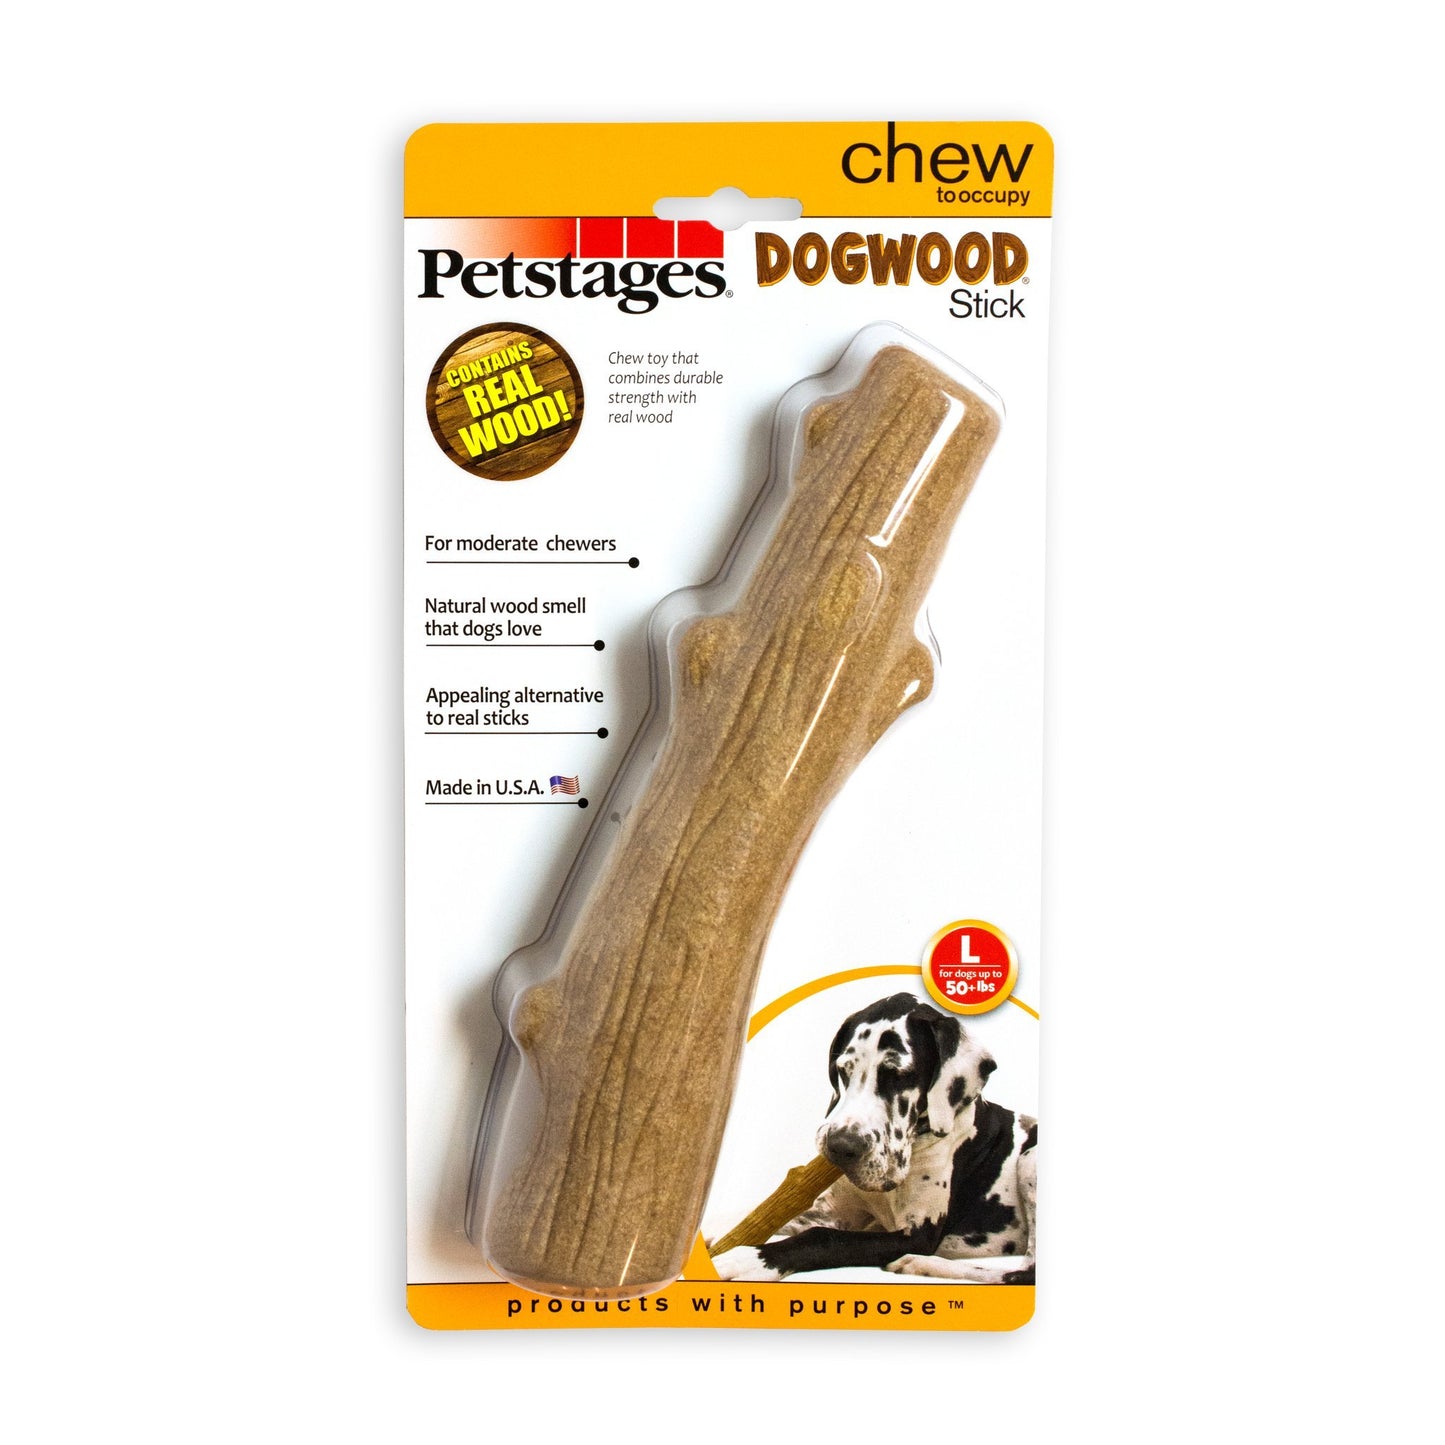 Petstages Dogwood Durable Stick - Chew Toys